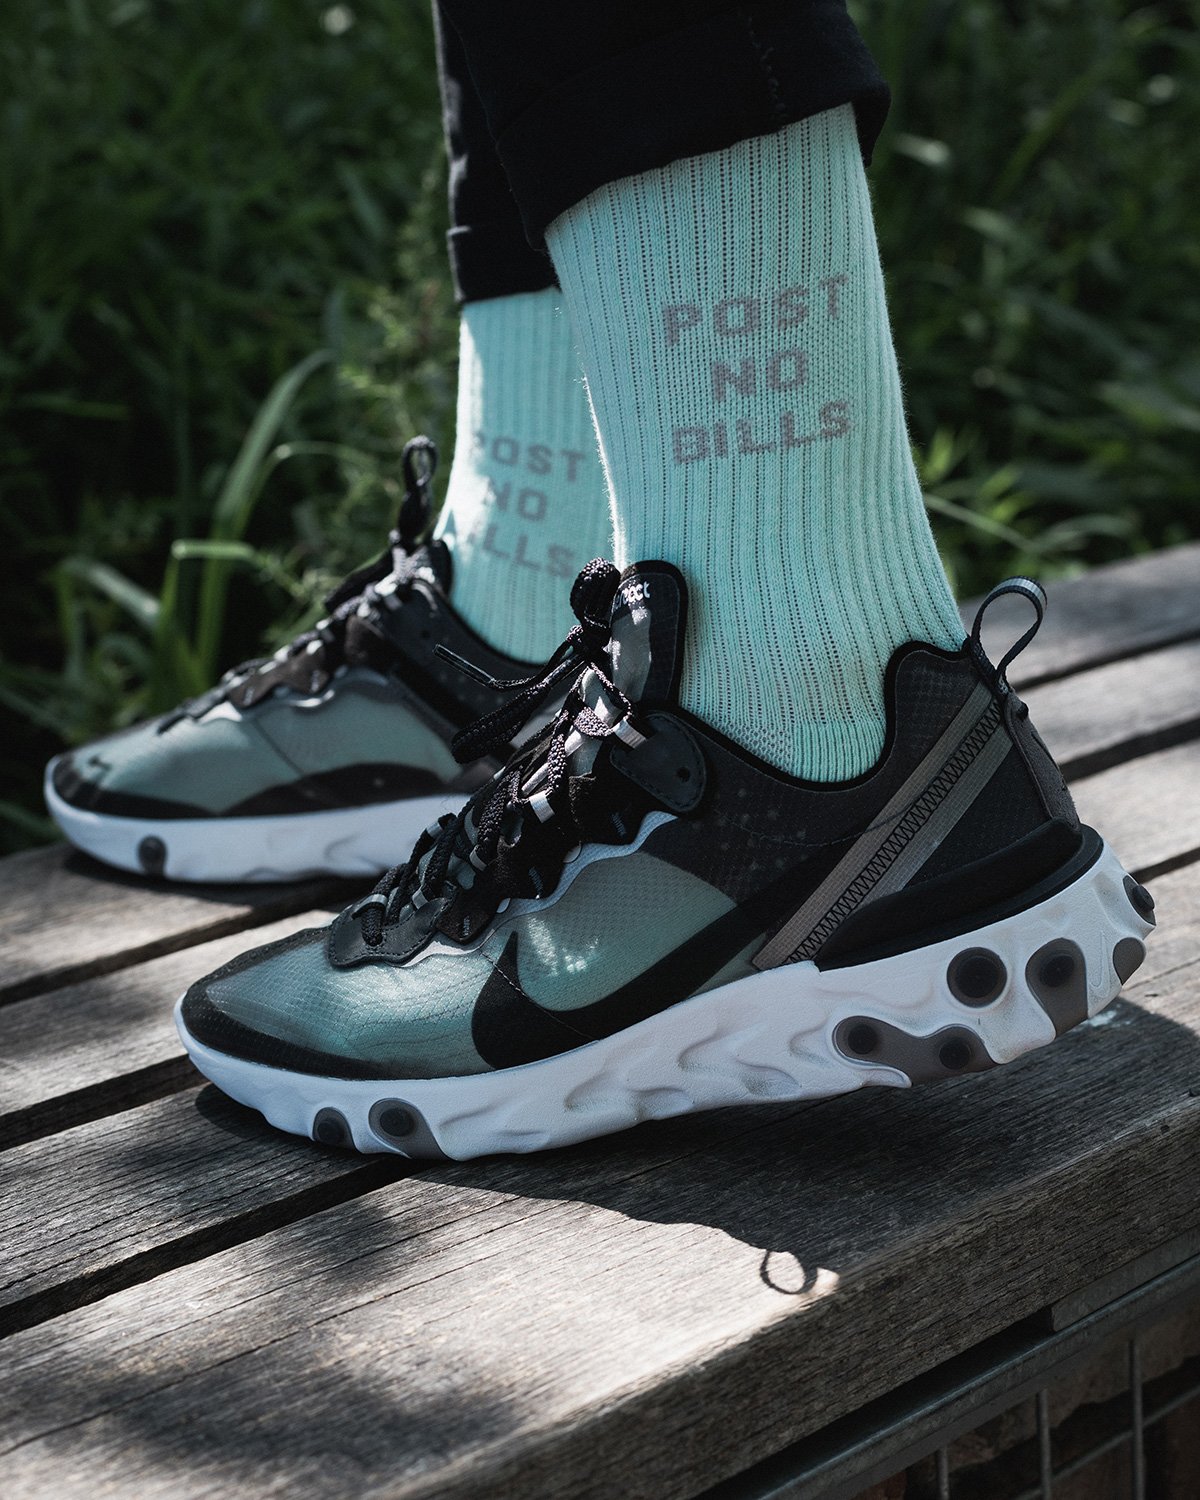 atmos USA on Twitter: "Nike React Element “Anthracite” will be available Friday in-store and online. Raffle is now live. enter: https://t.co/vOHiiKFhbz https://t.co/hXr1w21UOj" / Twitter